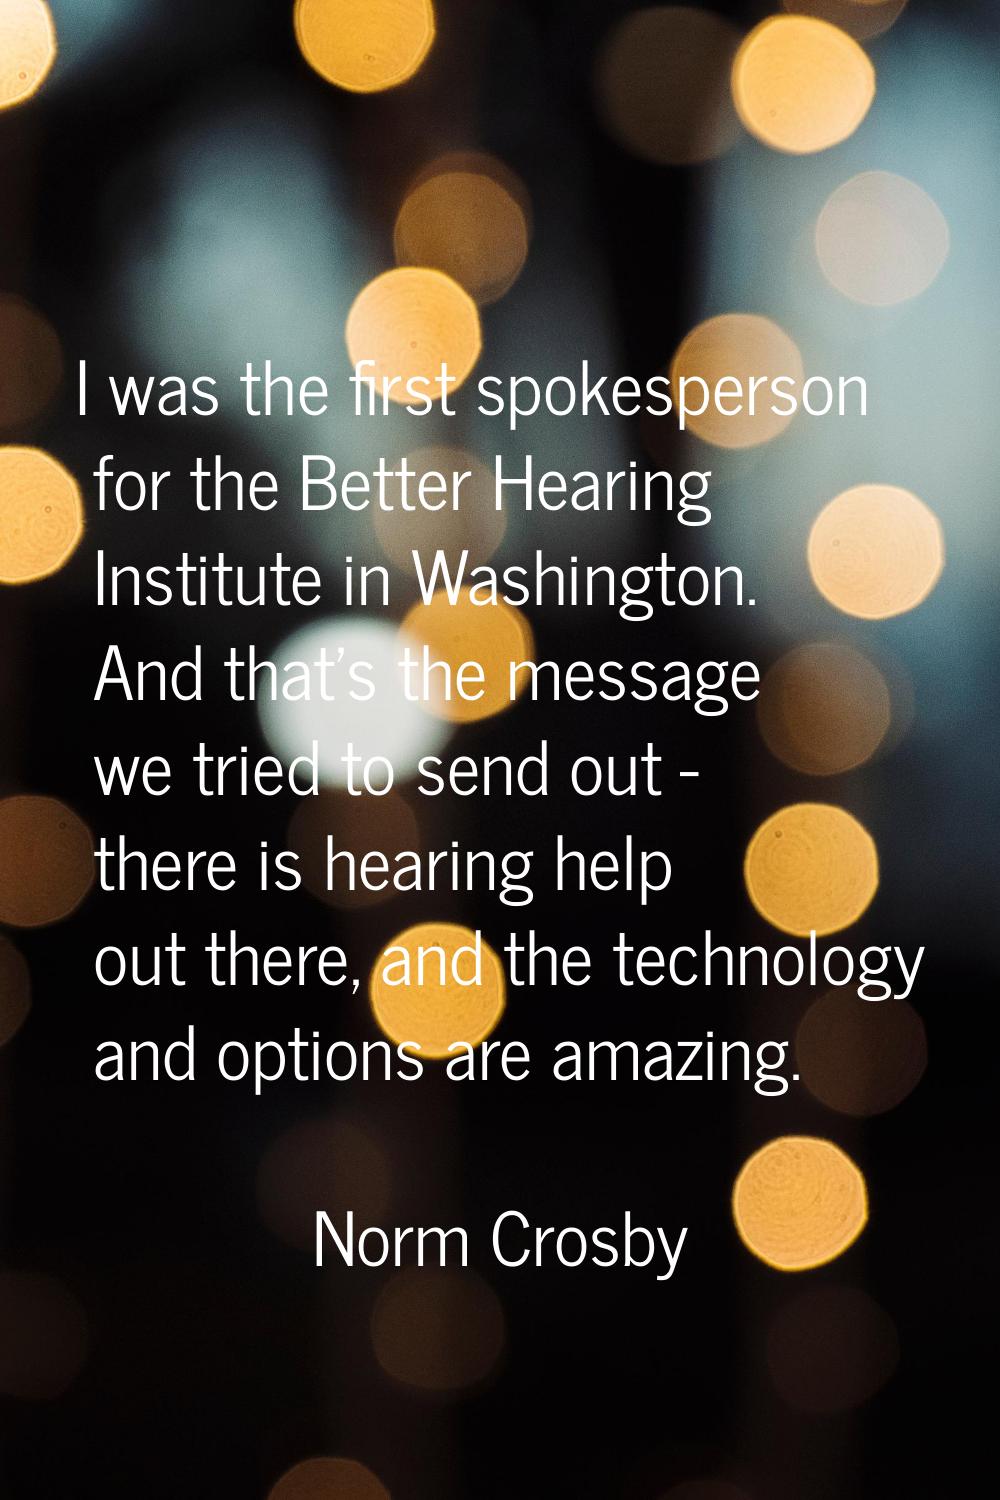 I was the first spokesperson for the Better Hearing Institute in Washington. And that's the message